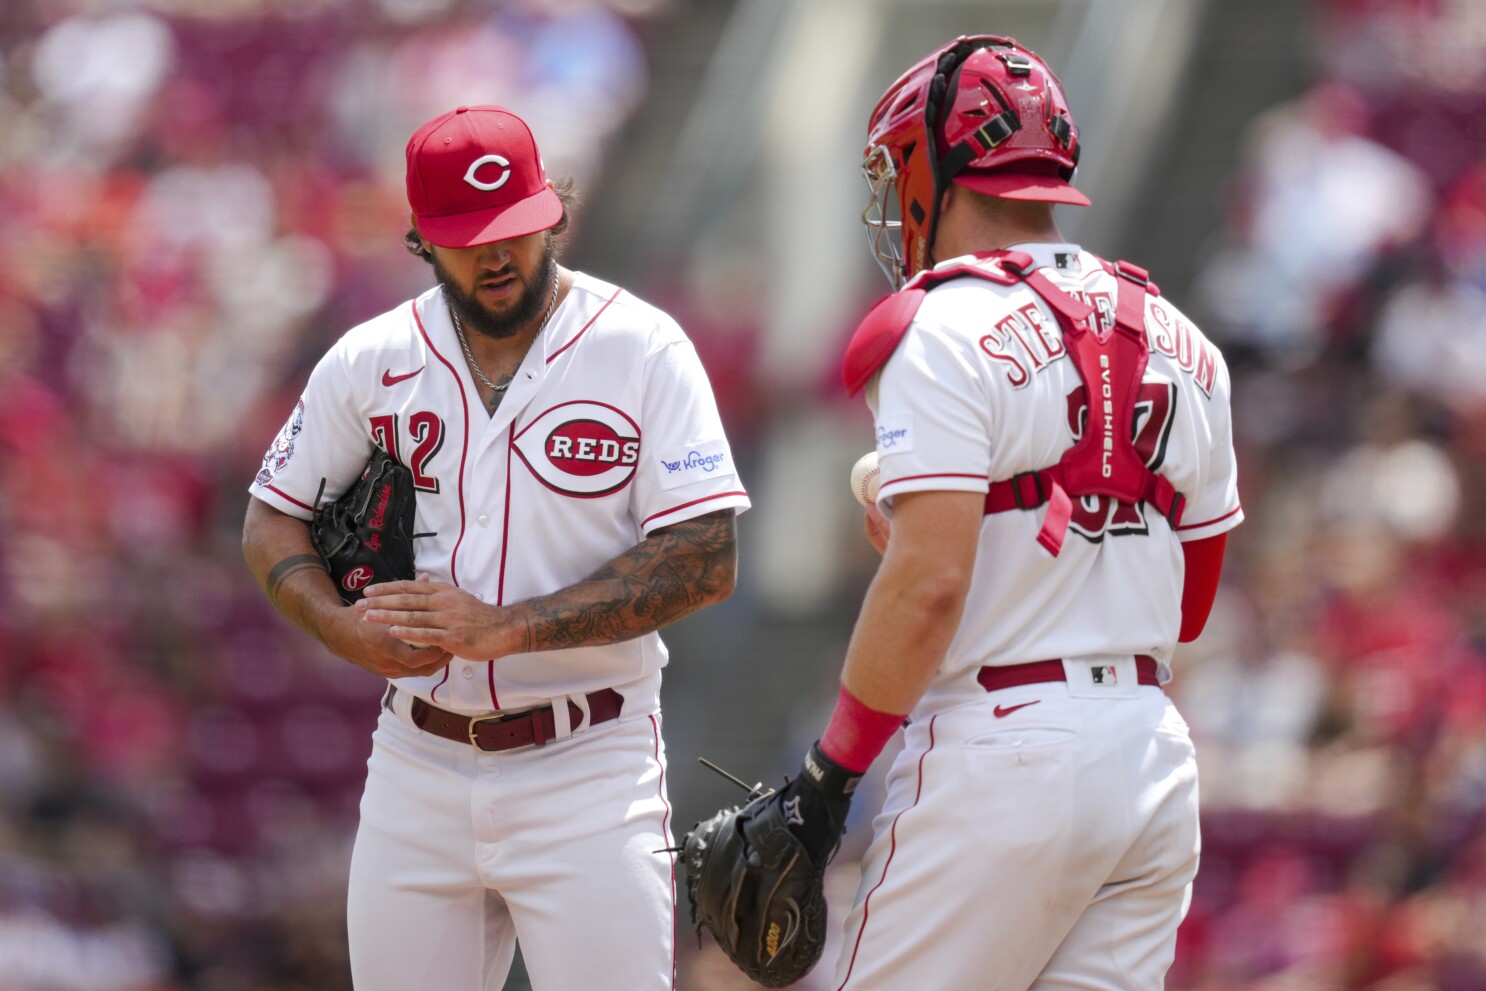 Reds rookie pitcher first in last 50 years to allow homers on first 2  career pitches